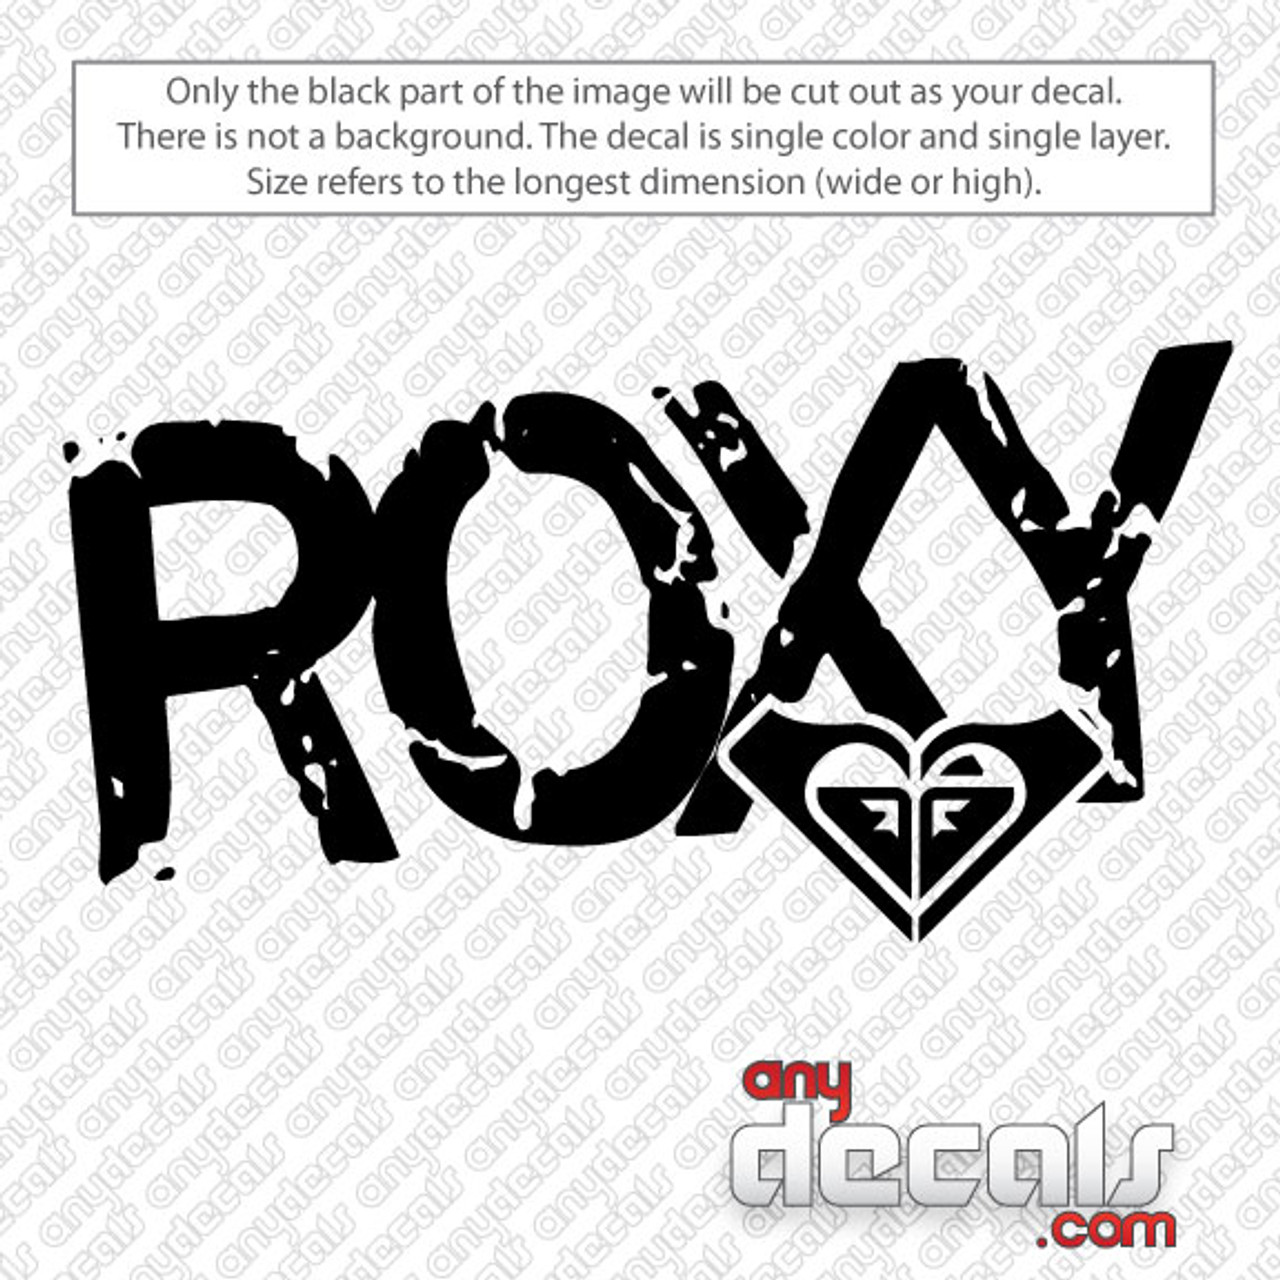 ego Toestand Slot Car Decals - Car Stickers | Roxy Distressed Surf Car Decal | AnyDecals.com